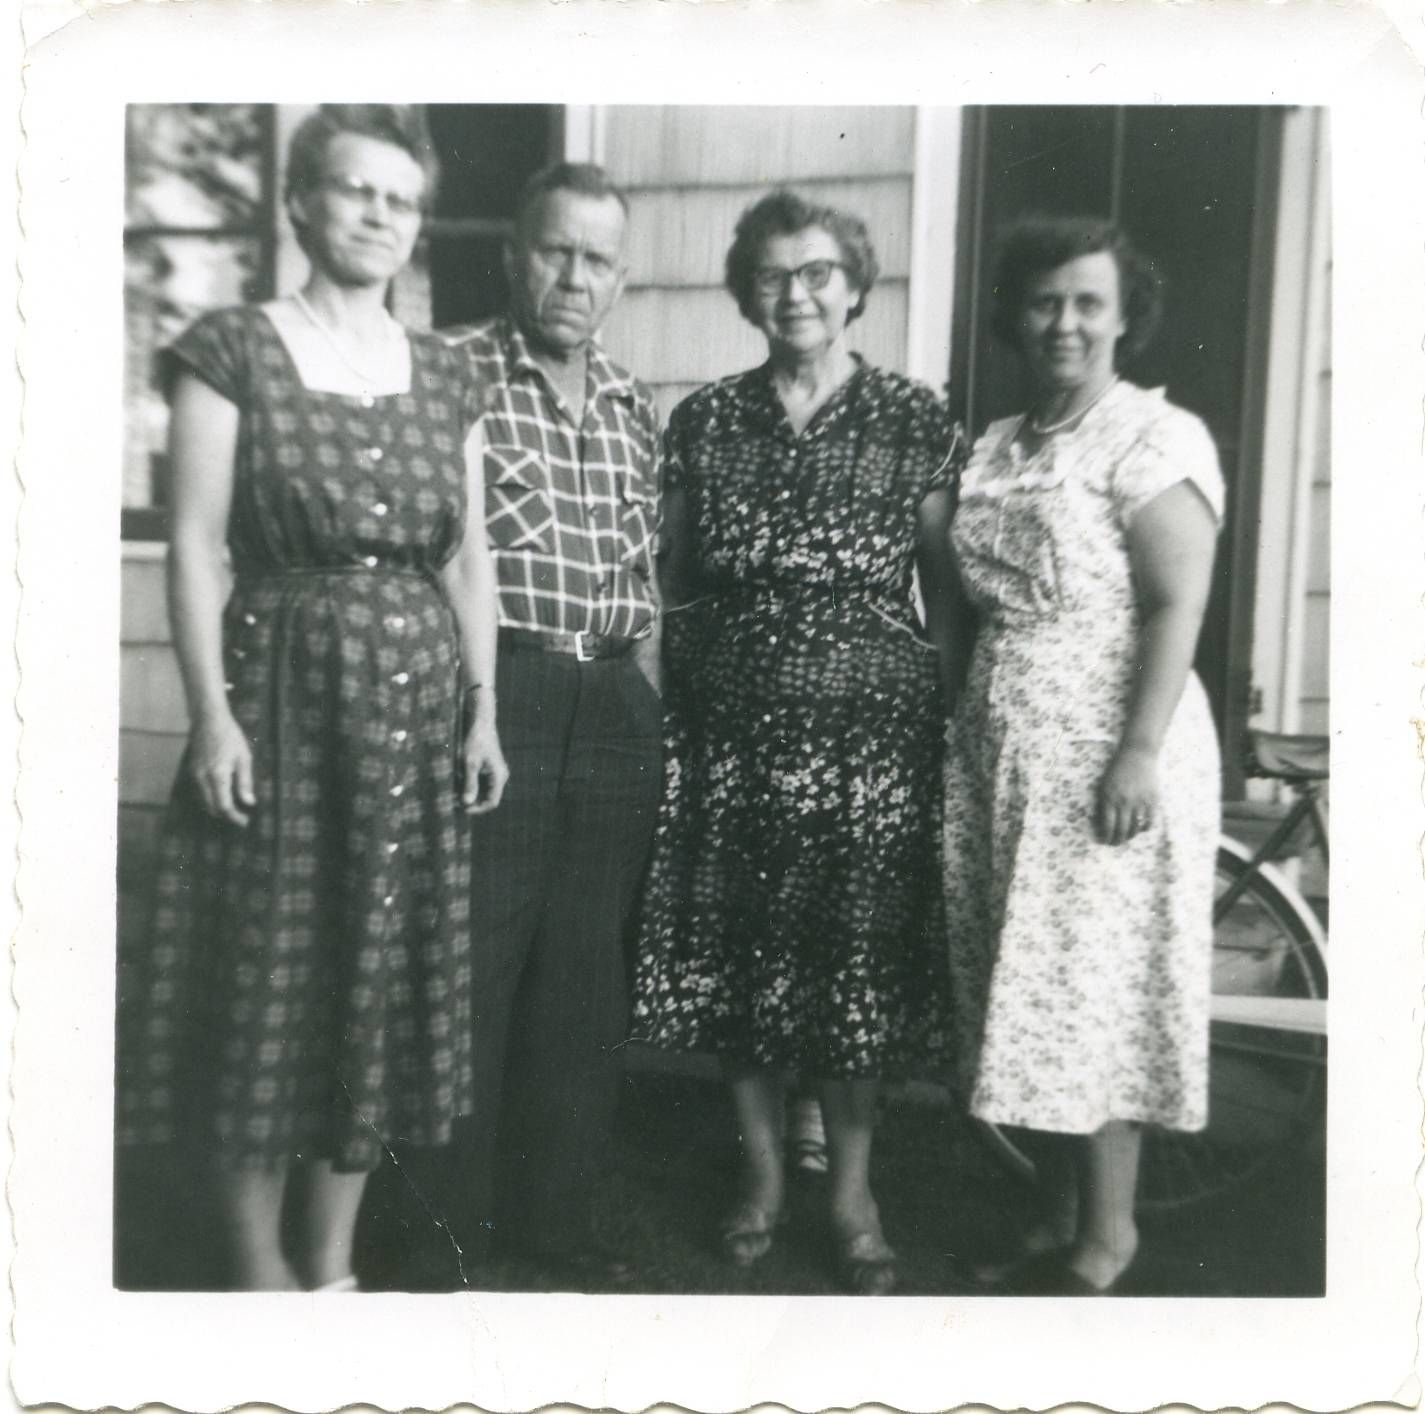 4 adults standing and dressed in formal clothes